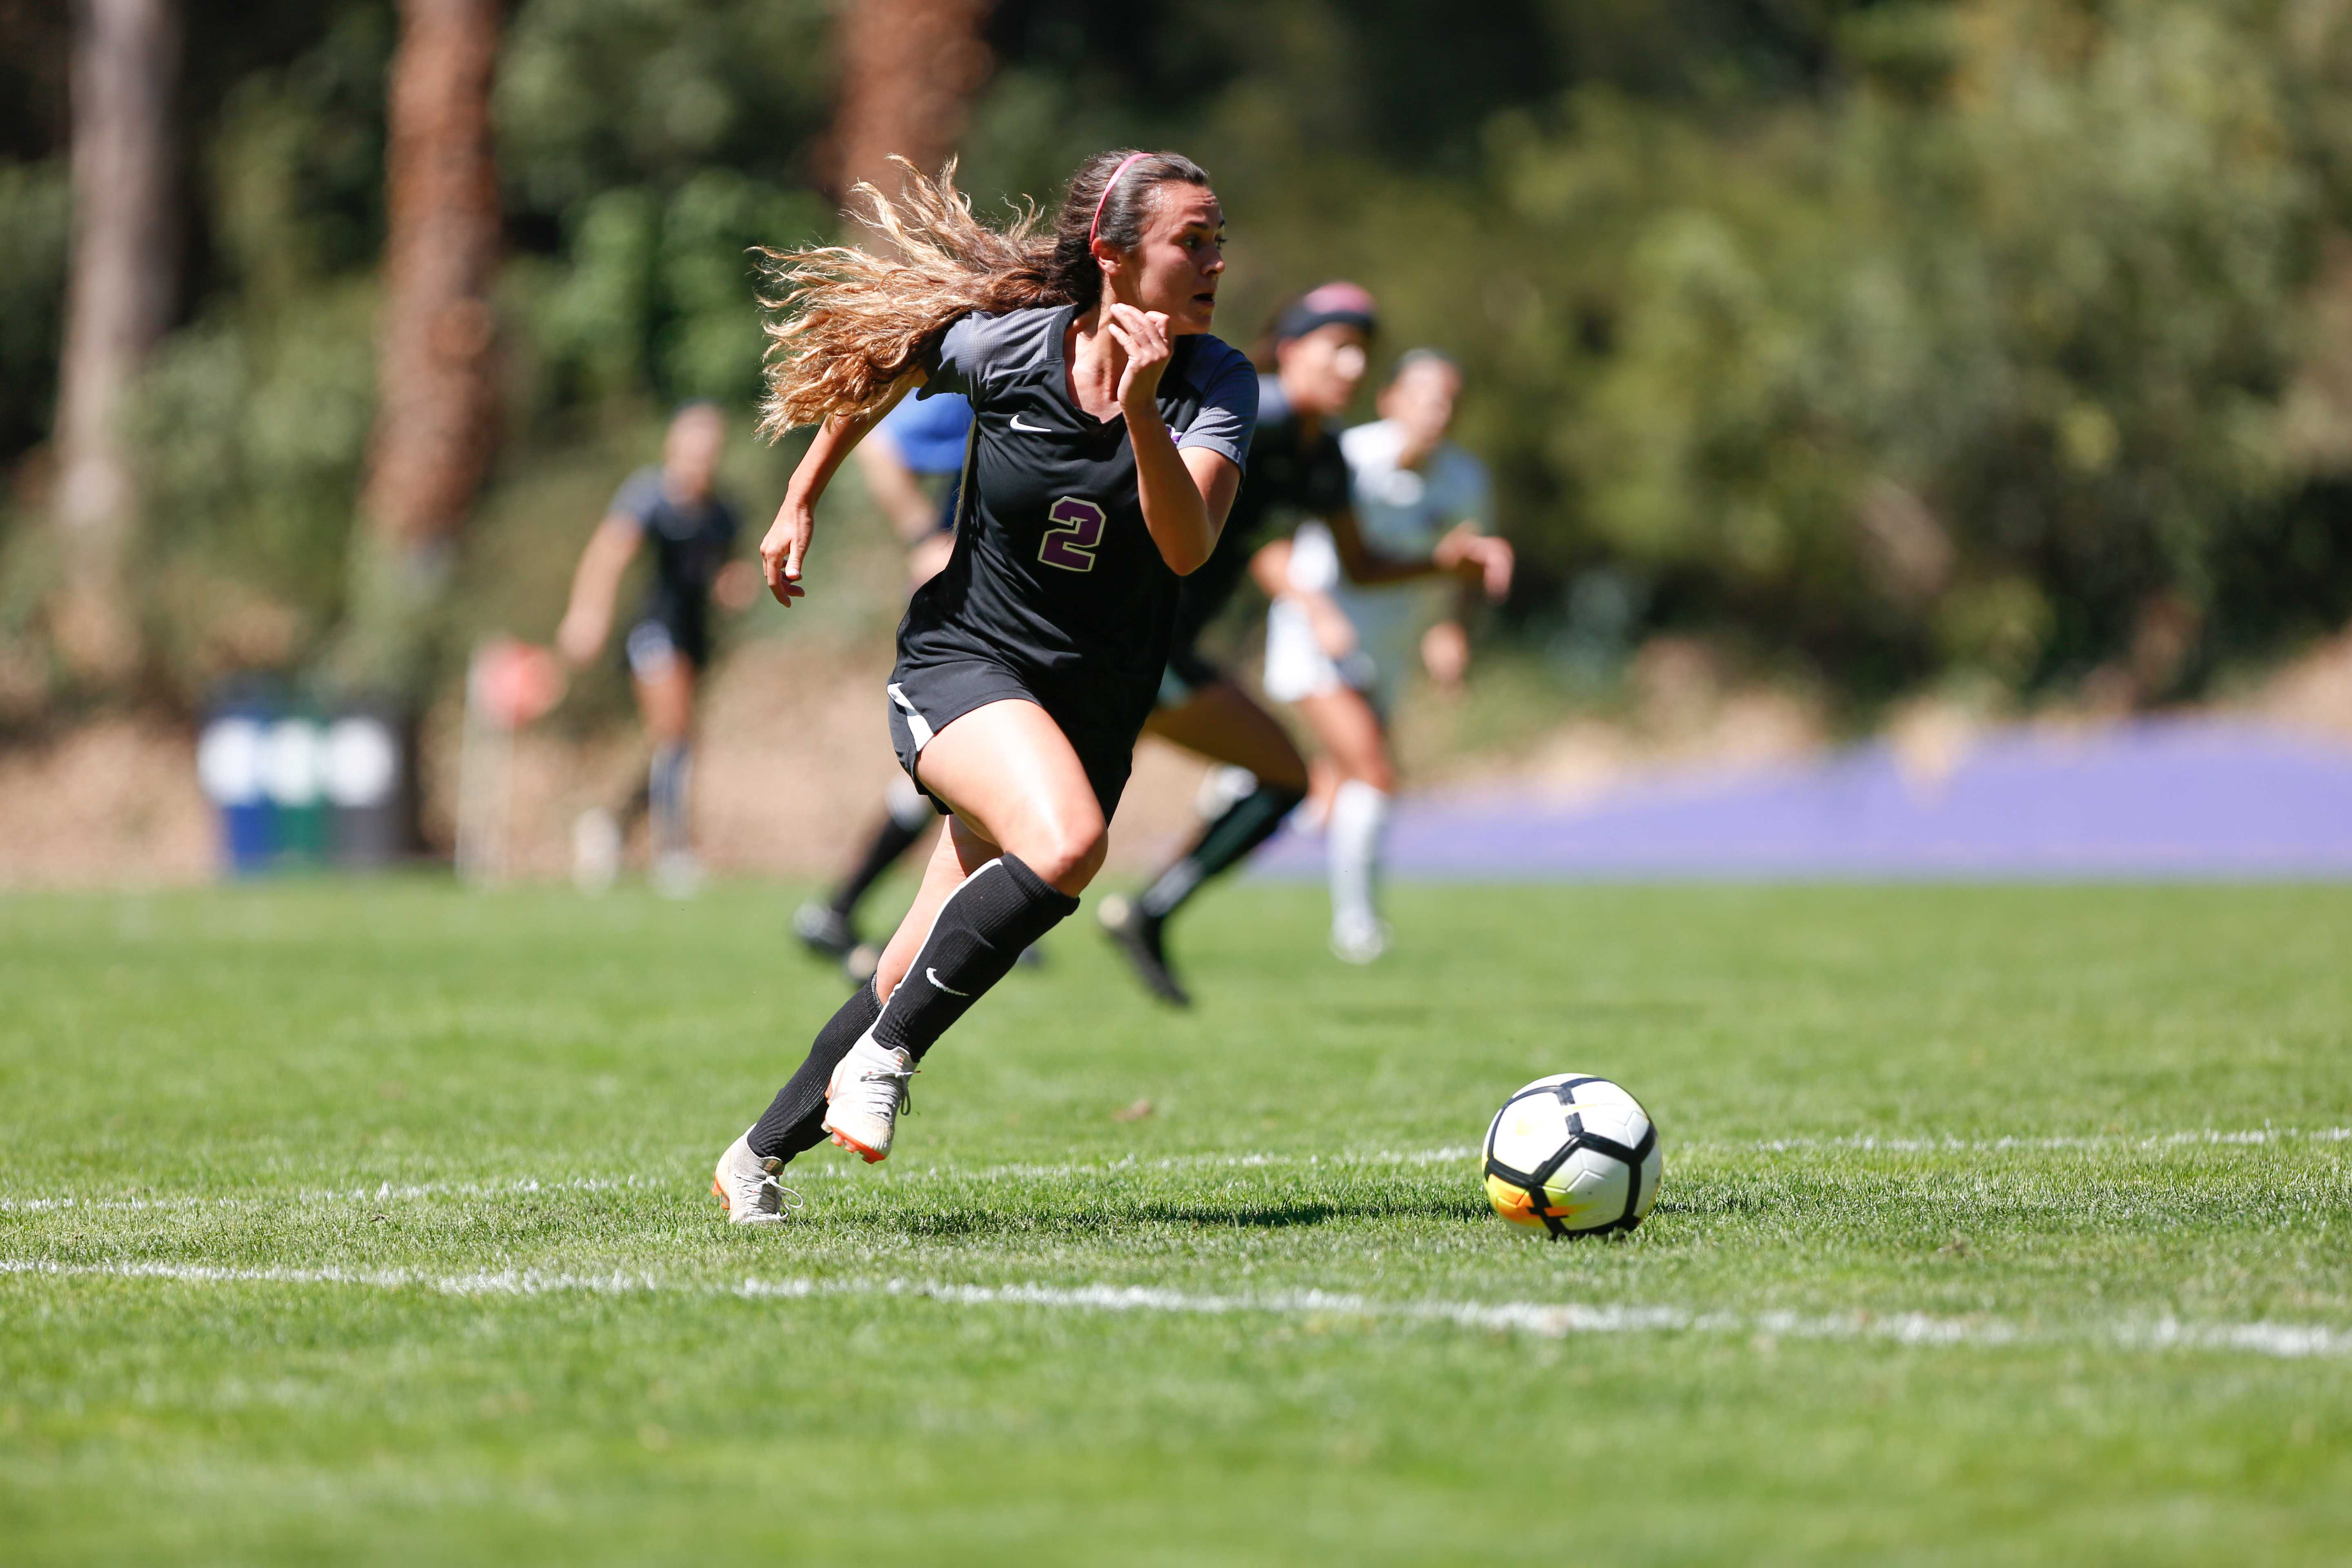 SF State midfielder Ana Williams races upfield after the opening kick off during the womens soccer home opener against Seattle Pacific on Saturday Sept. 8, 2018. (Niko LaBarbera/Golden Gate Xpress)